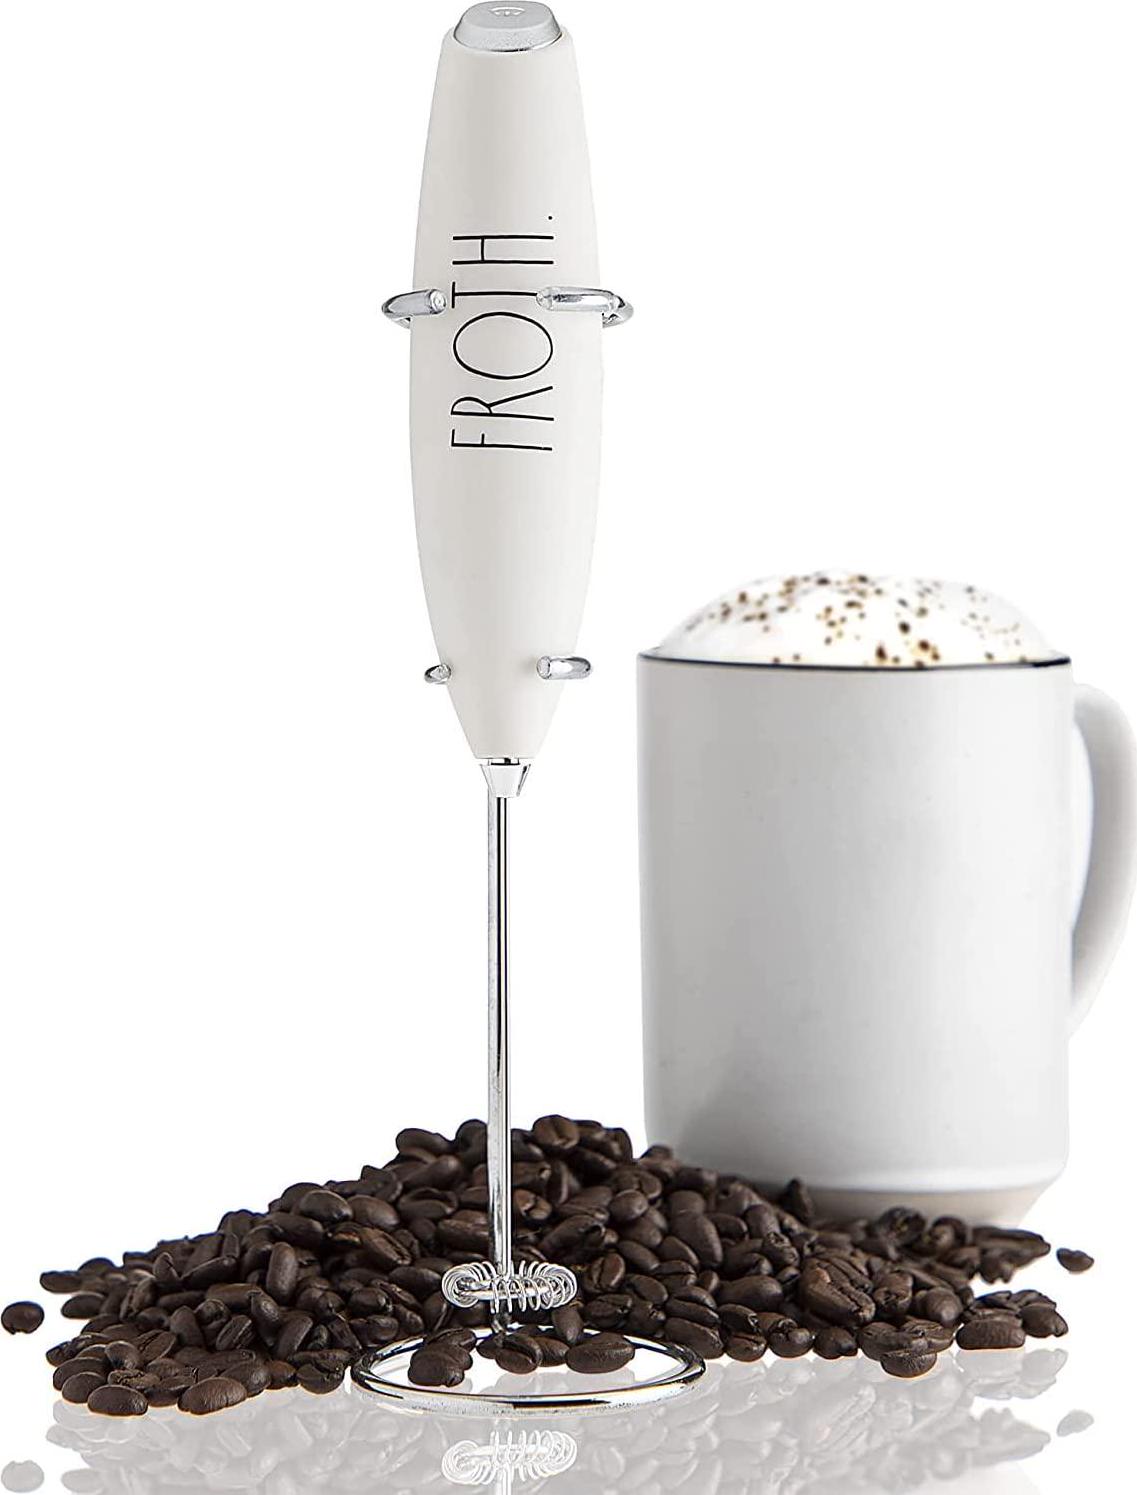 HLculture, Milk Frother, Milk Frother Handheld Foam Maker for Coffee - Handheld, Mini Electric Drink Mixer, Foamer and Frother with Stand for Coffee, Lattes, Hot Chocolates and Shakes (White)